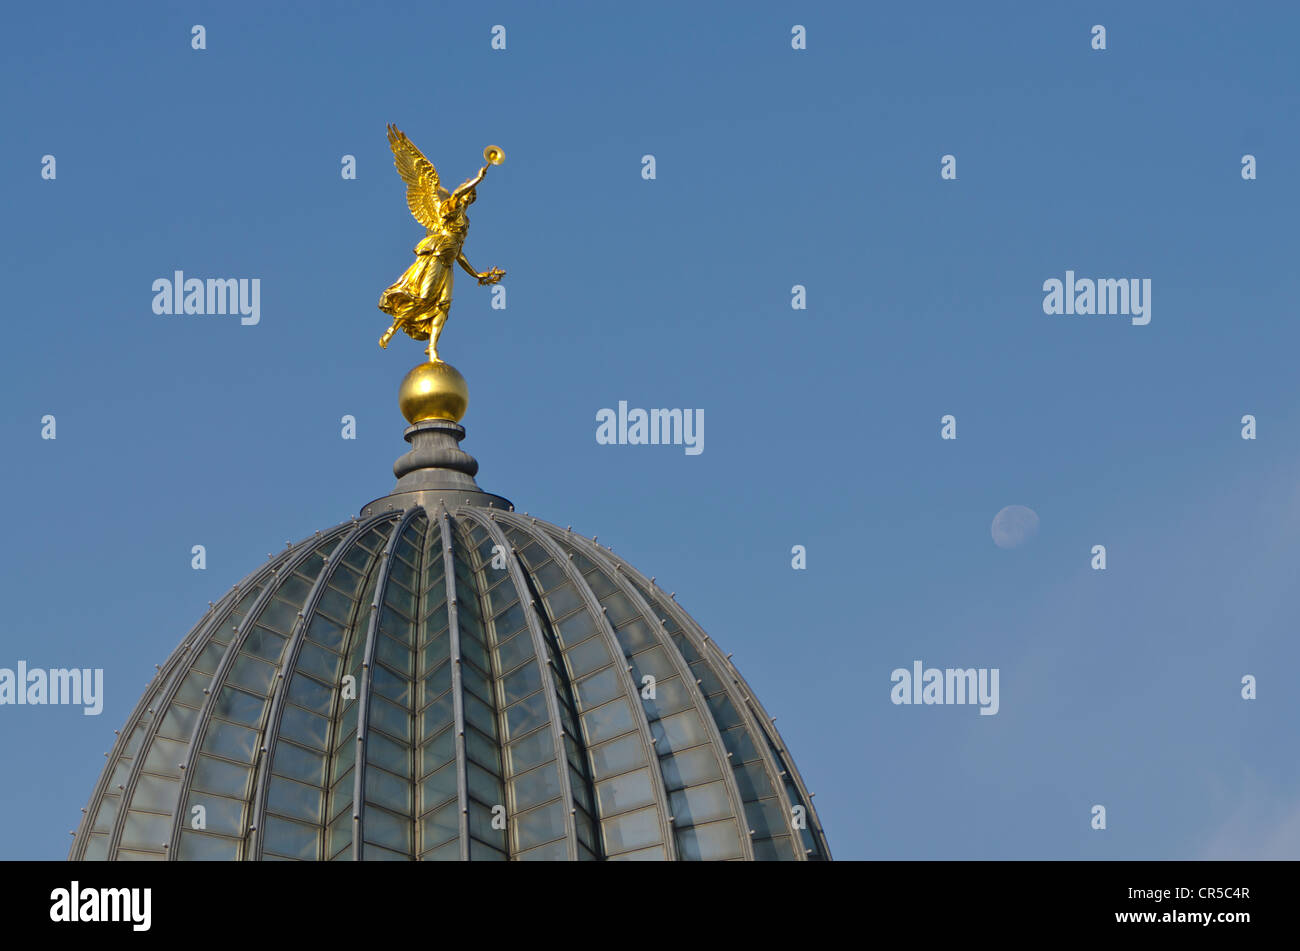 Golden angel sculpture on the cupola of the Dresden Academy of Fine Arts building, Dresden, Saxony, Germany, Europe Stock Photo